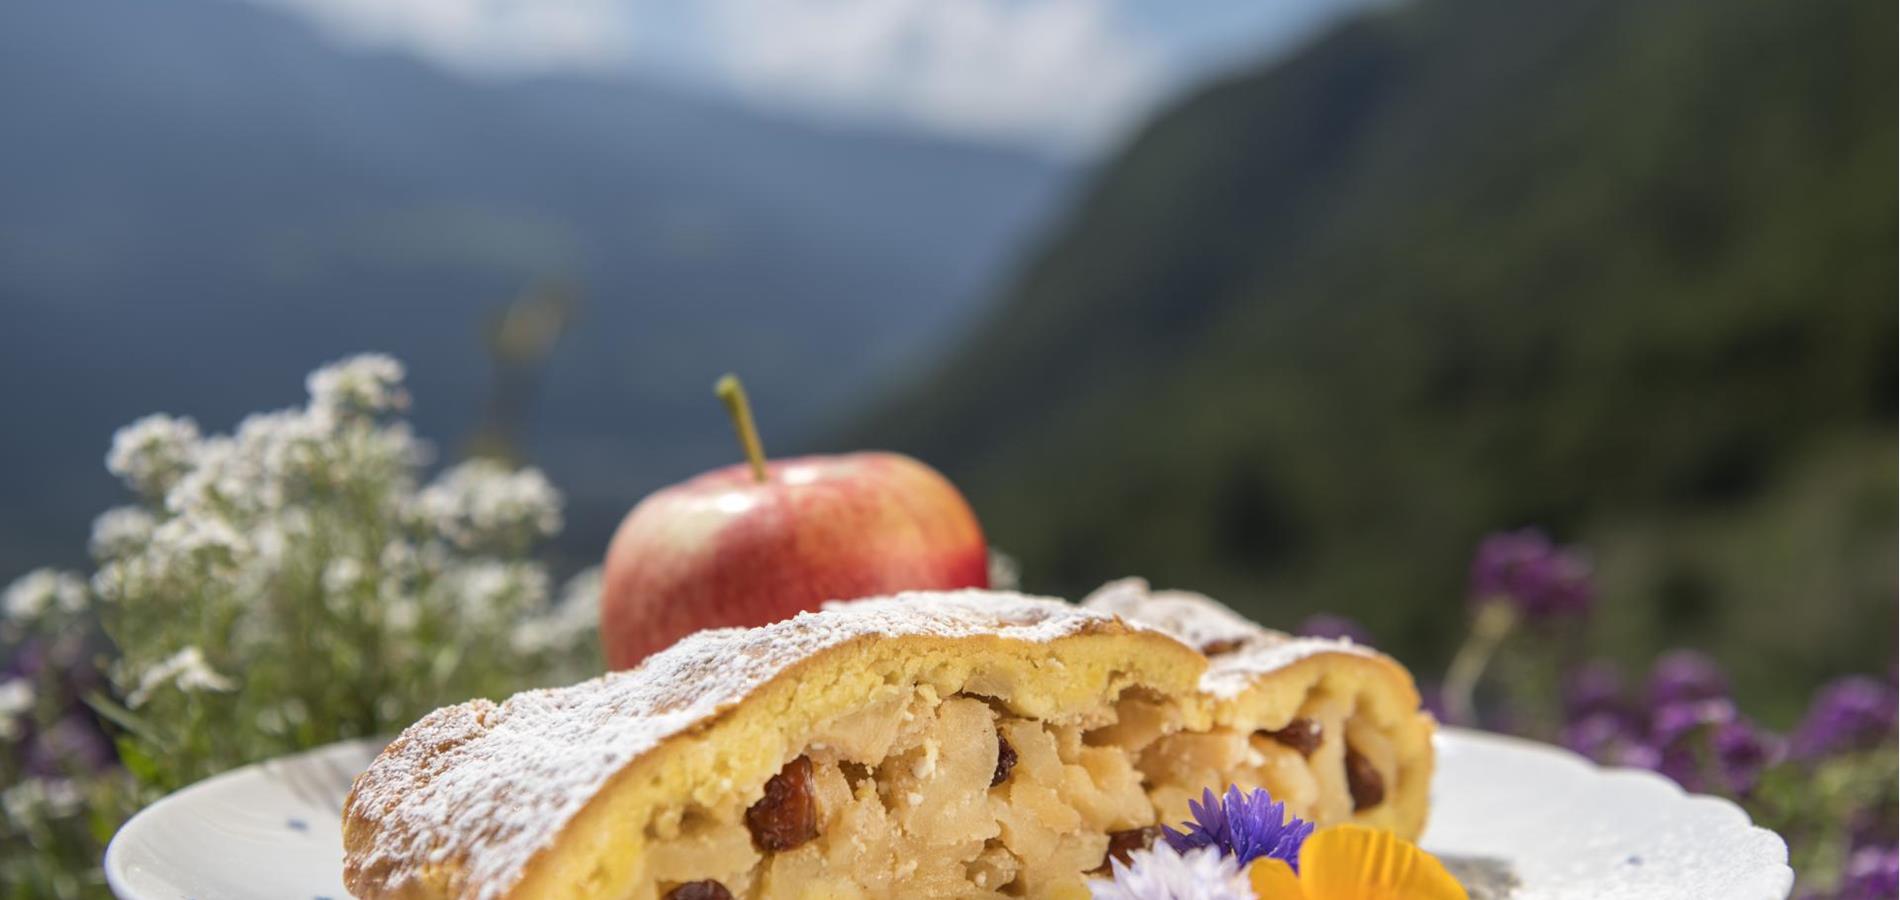 Apple strudel with shortcrust pastry